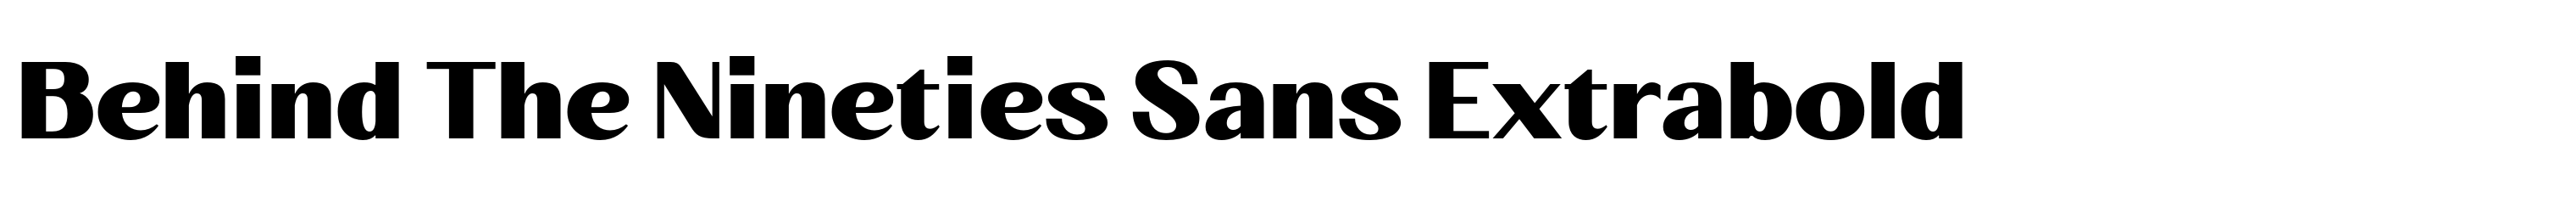 Behind The Nineties Sans Extrabold